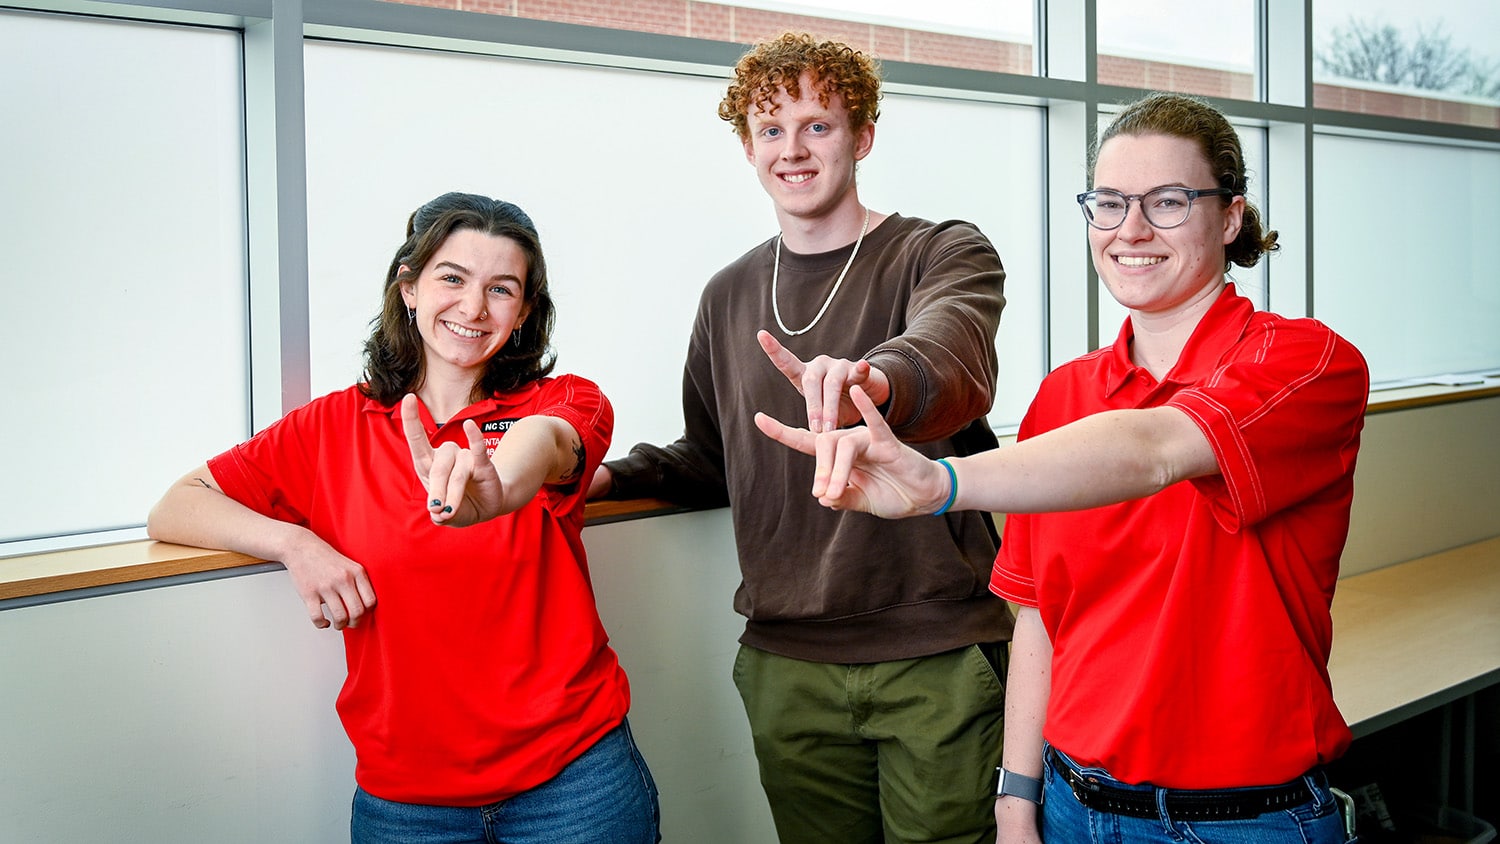 Alexis Jacobs (left, wearing red short-sleeve shirt), Caleb Moore (middle, wearing dark olive green long-sleeve shirt) and Lauren Bradley (right, wearing red short-sleeve shirt) are three of NC State's Mental Health Ambassadors. All three are showing the Wolfpack hand sign.